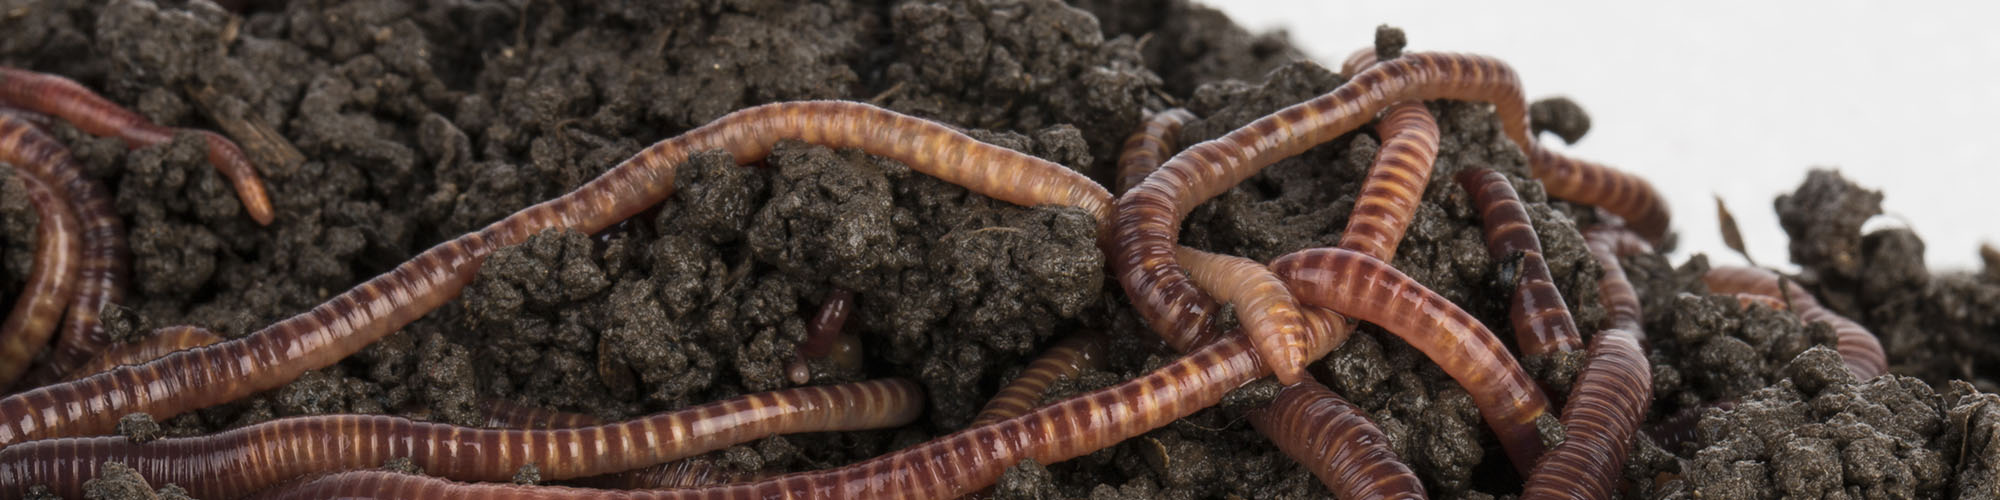 vermicomposting worms in compost dirt